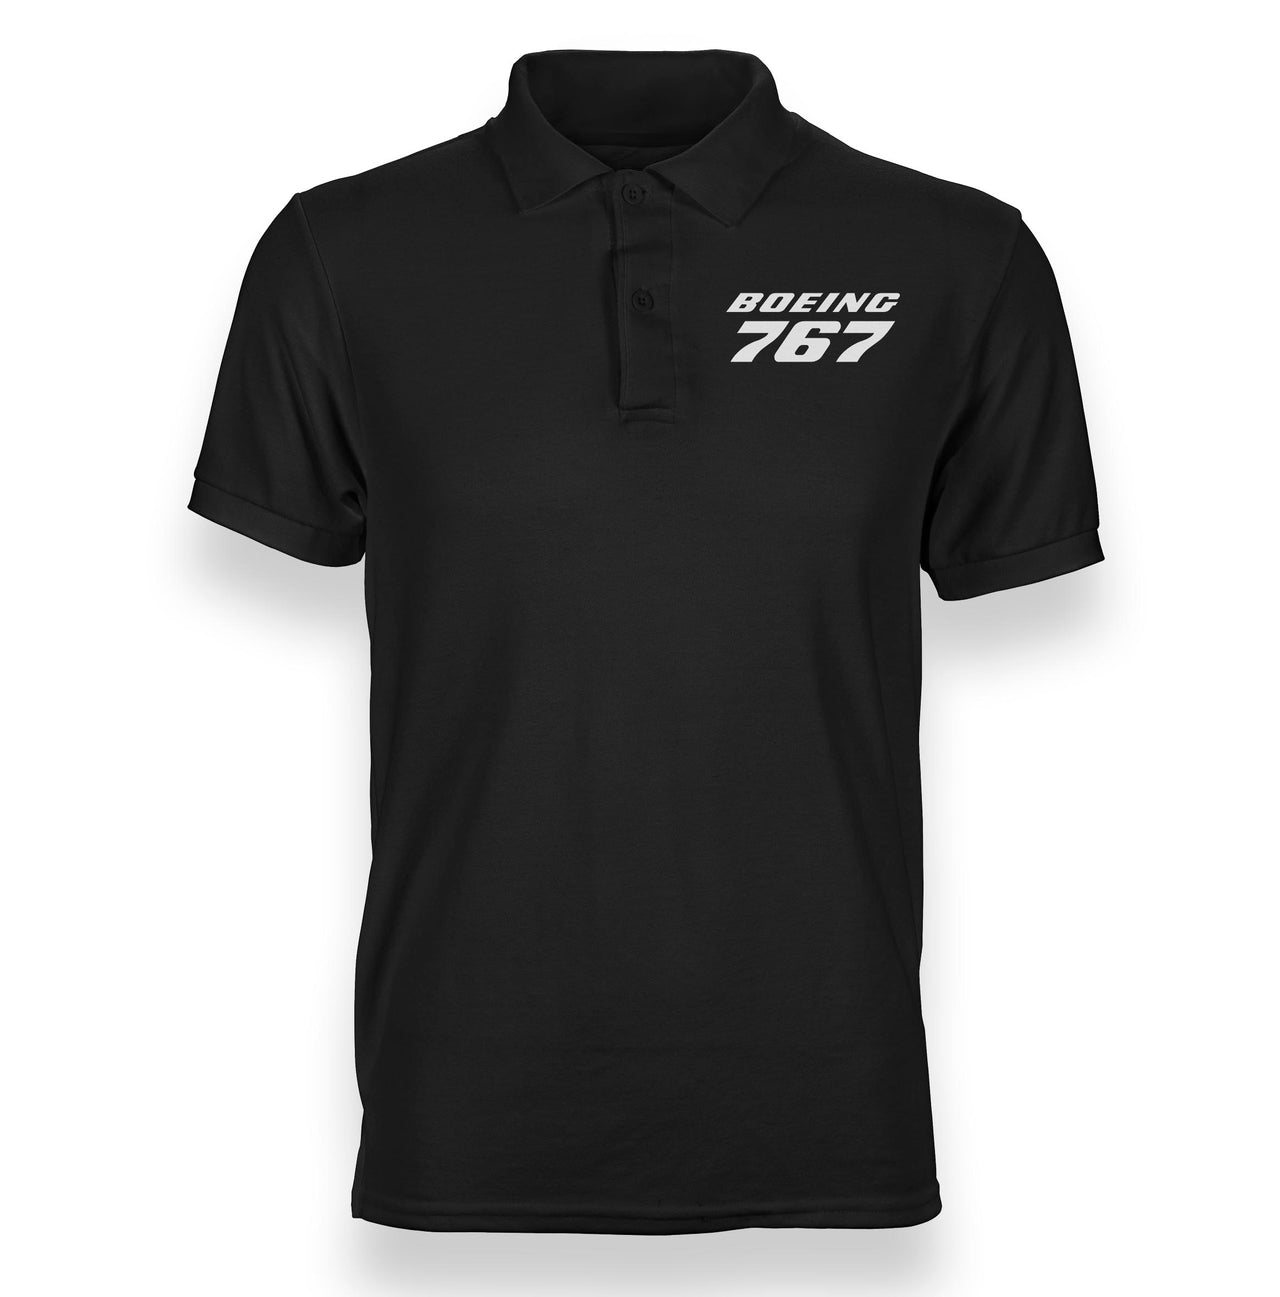 Boeing 767 & Text Designed Polo T-Shirts